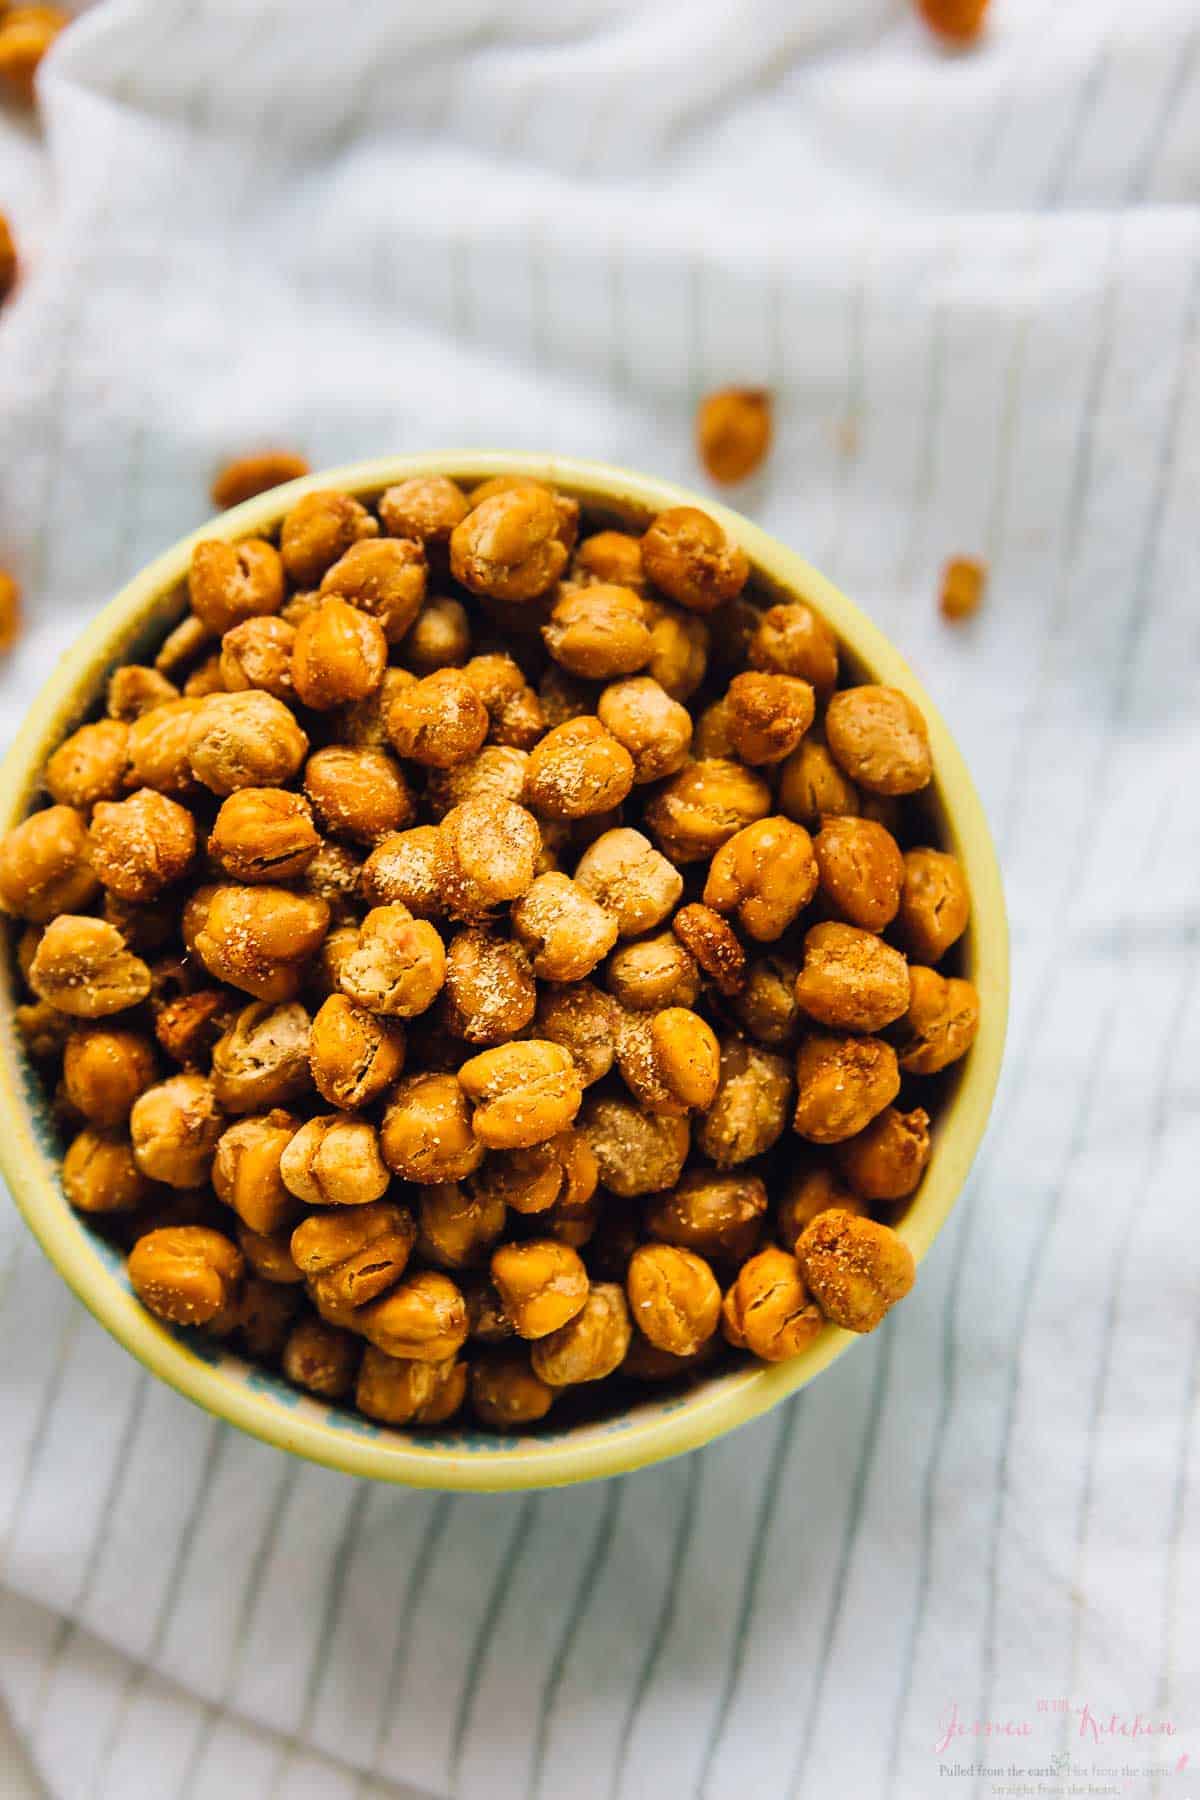 Overhead view of crispy roasted chickpeas in bowl